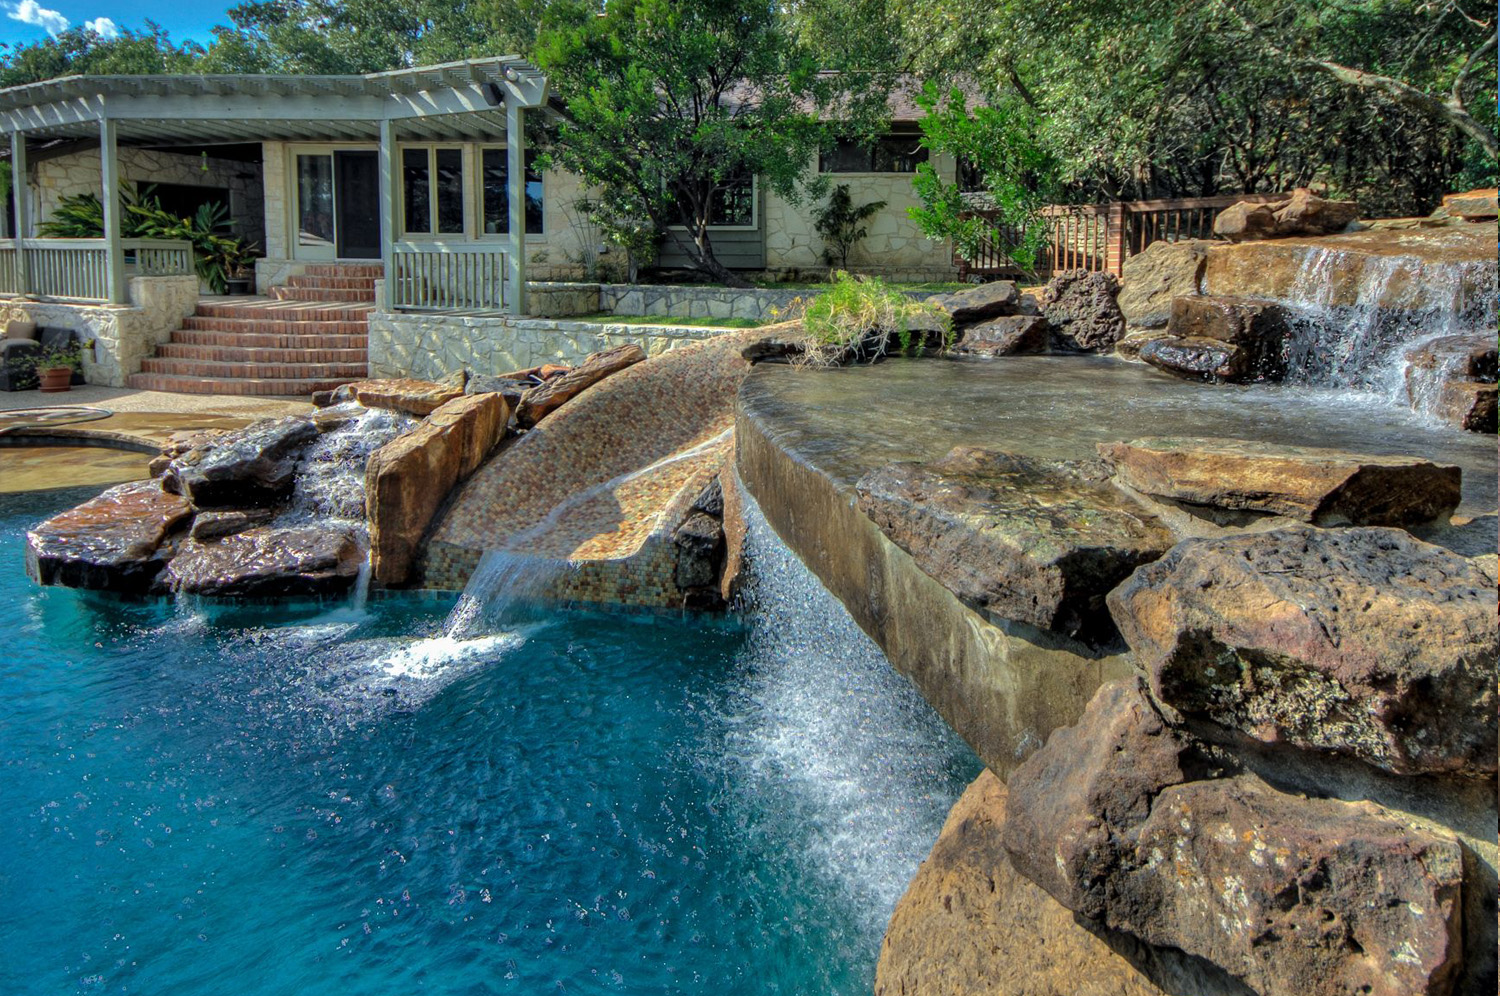 Pool remodel with rock waterfall feature.